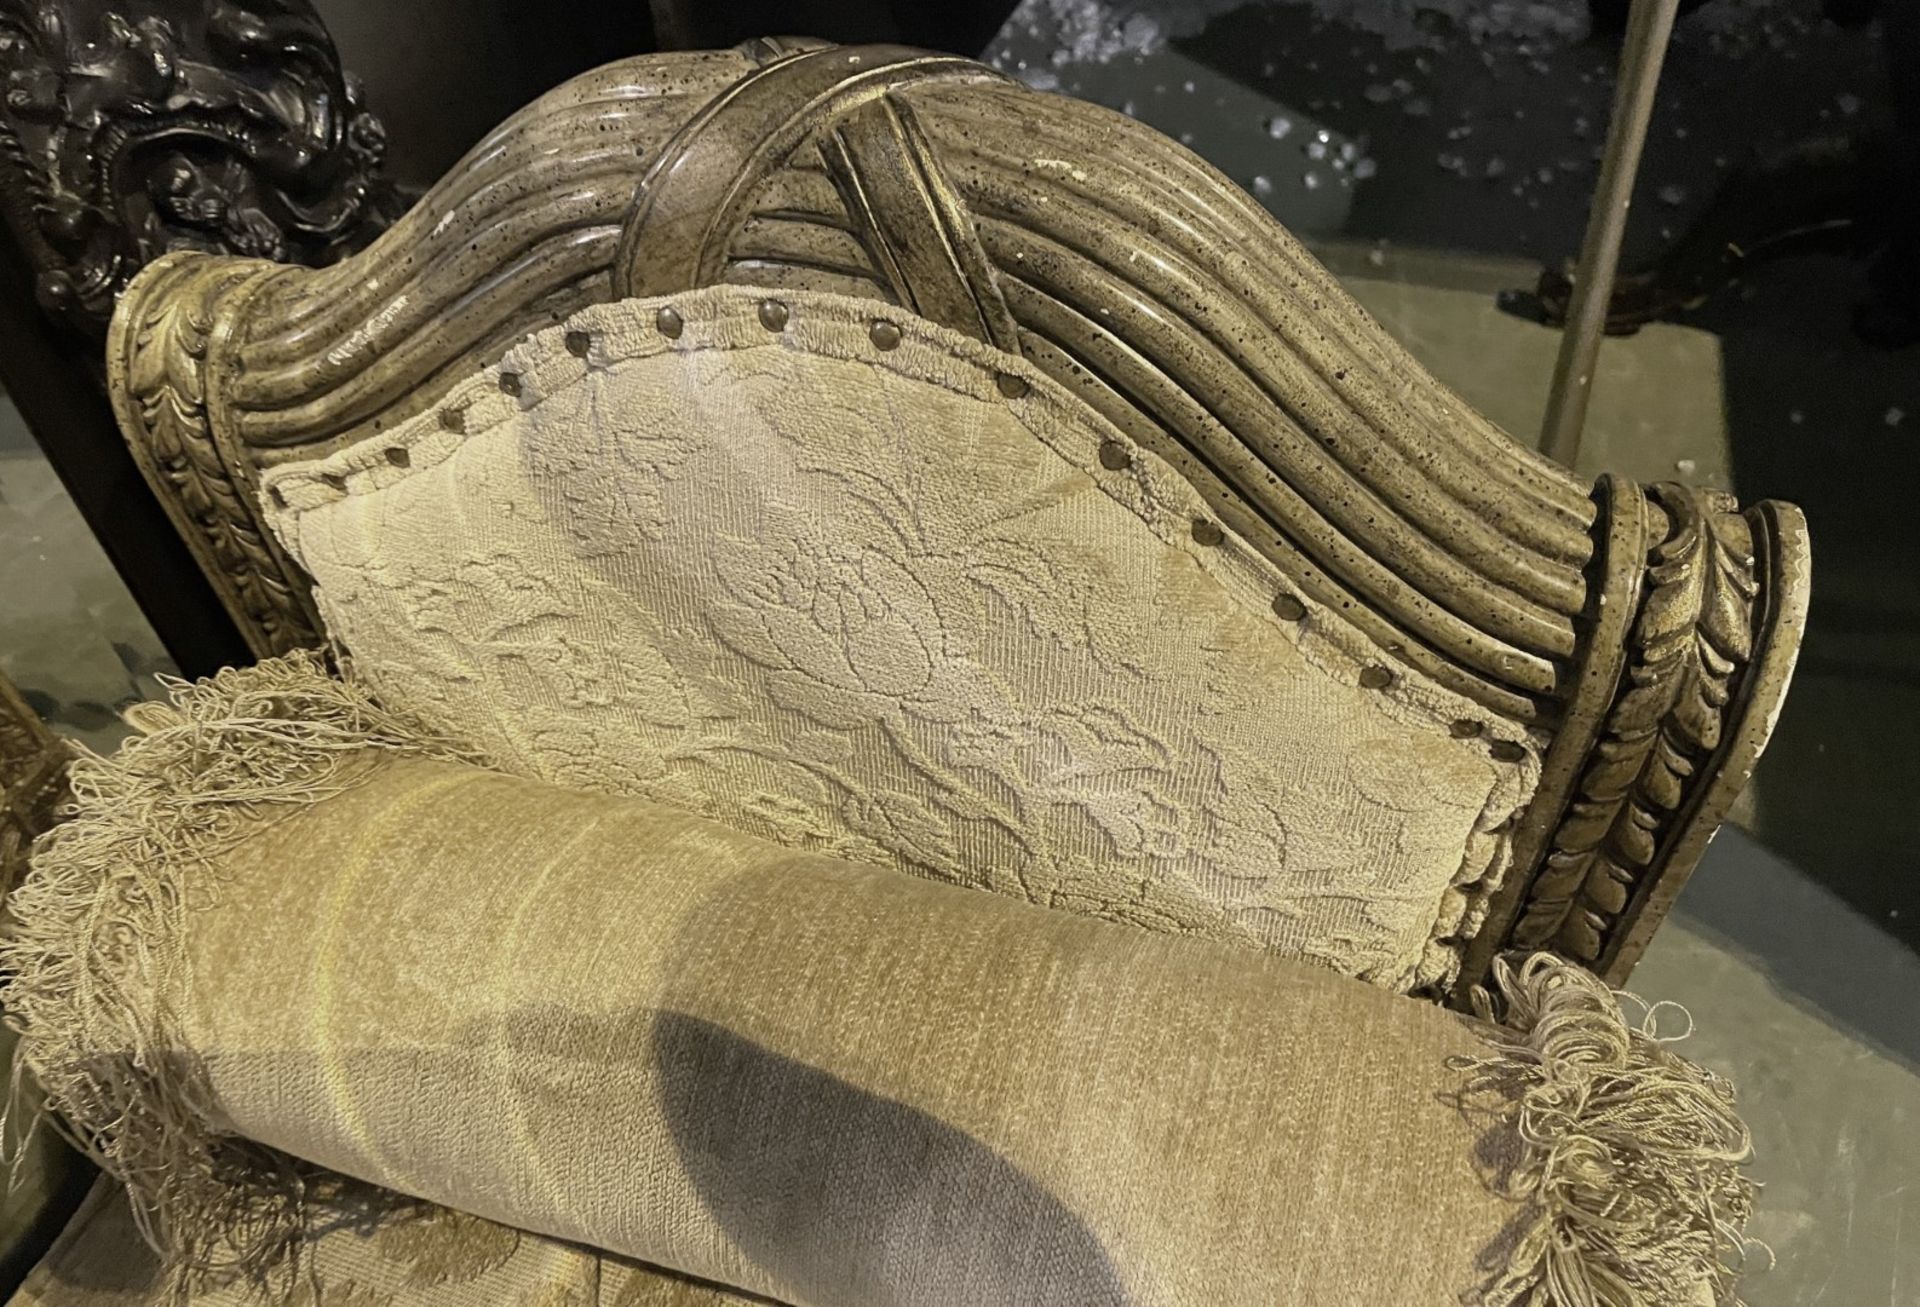 1 x Ornate And Beautifully Covered Chaise Longue With Roll Cushion - Approx 150X50X80Cm - Image 2 of 11